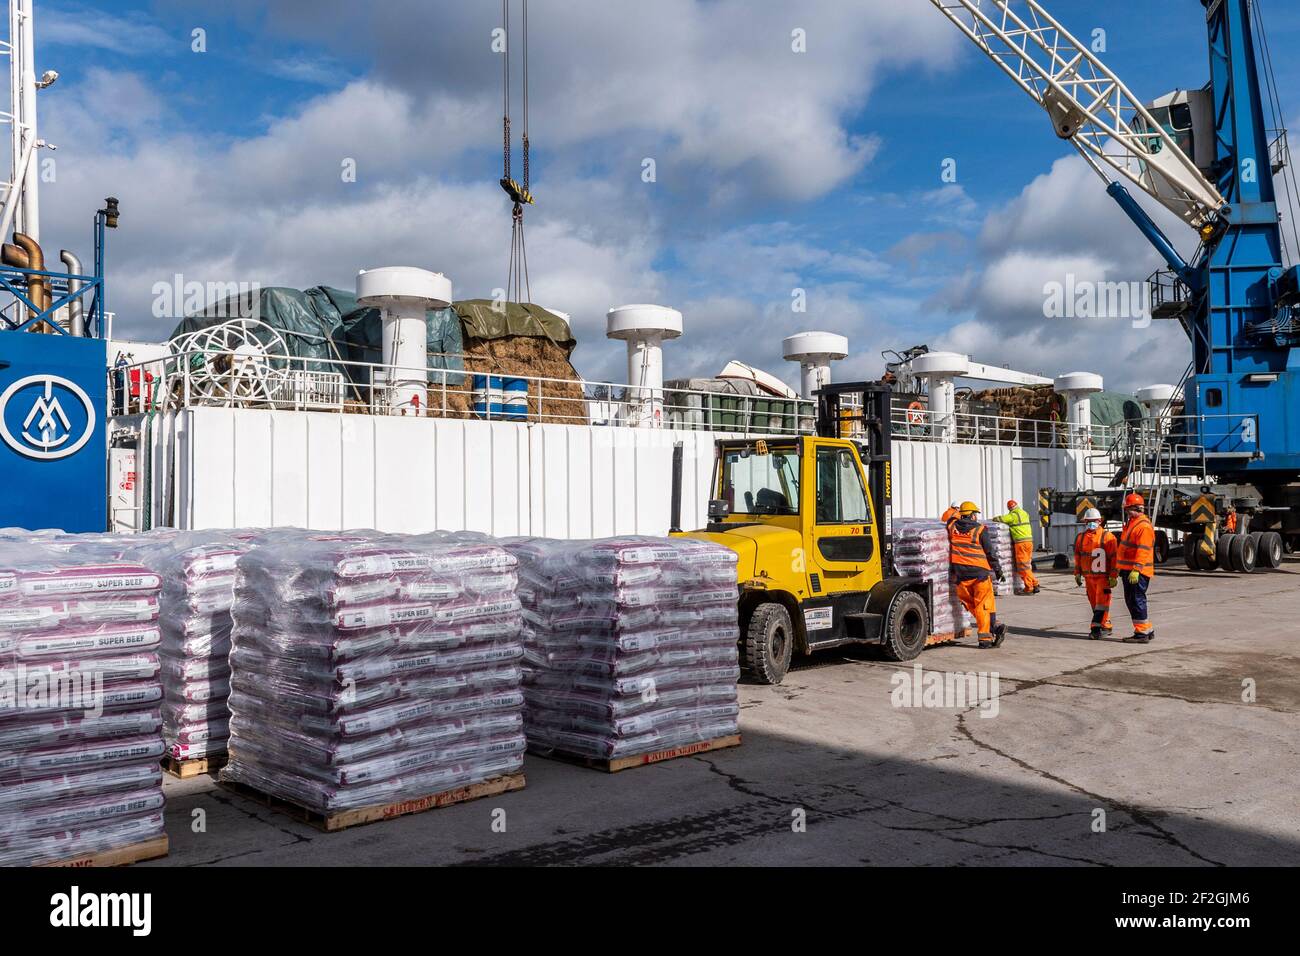 Cork, Ireland. 12th Mar, 2021. The livestock transportation ship 'Finola M' is loaded with feed at Kennedy Quay, Port of Cork, before cattle are loaded tomorrow for export. Credit: AG News/Alamy Live News Stock Photo